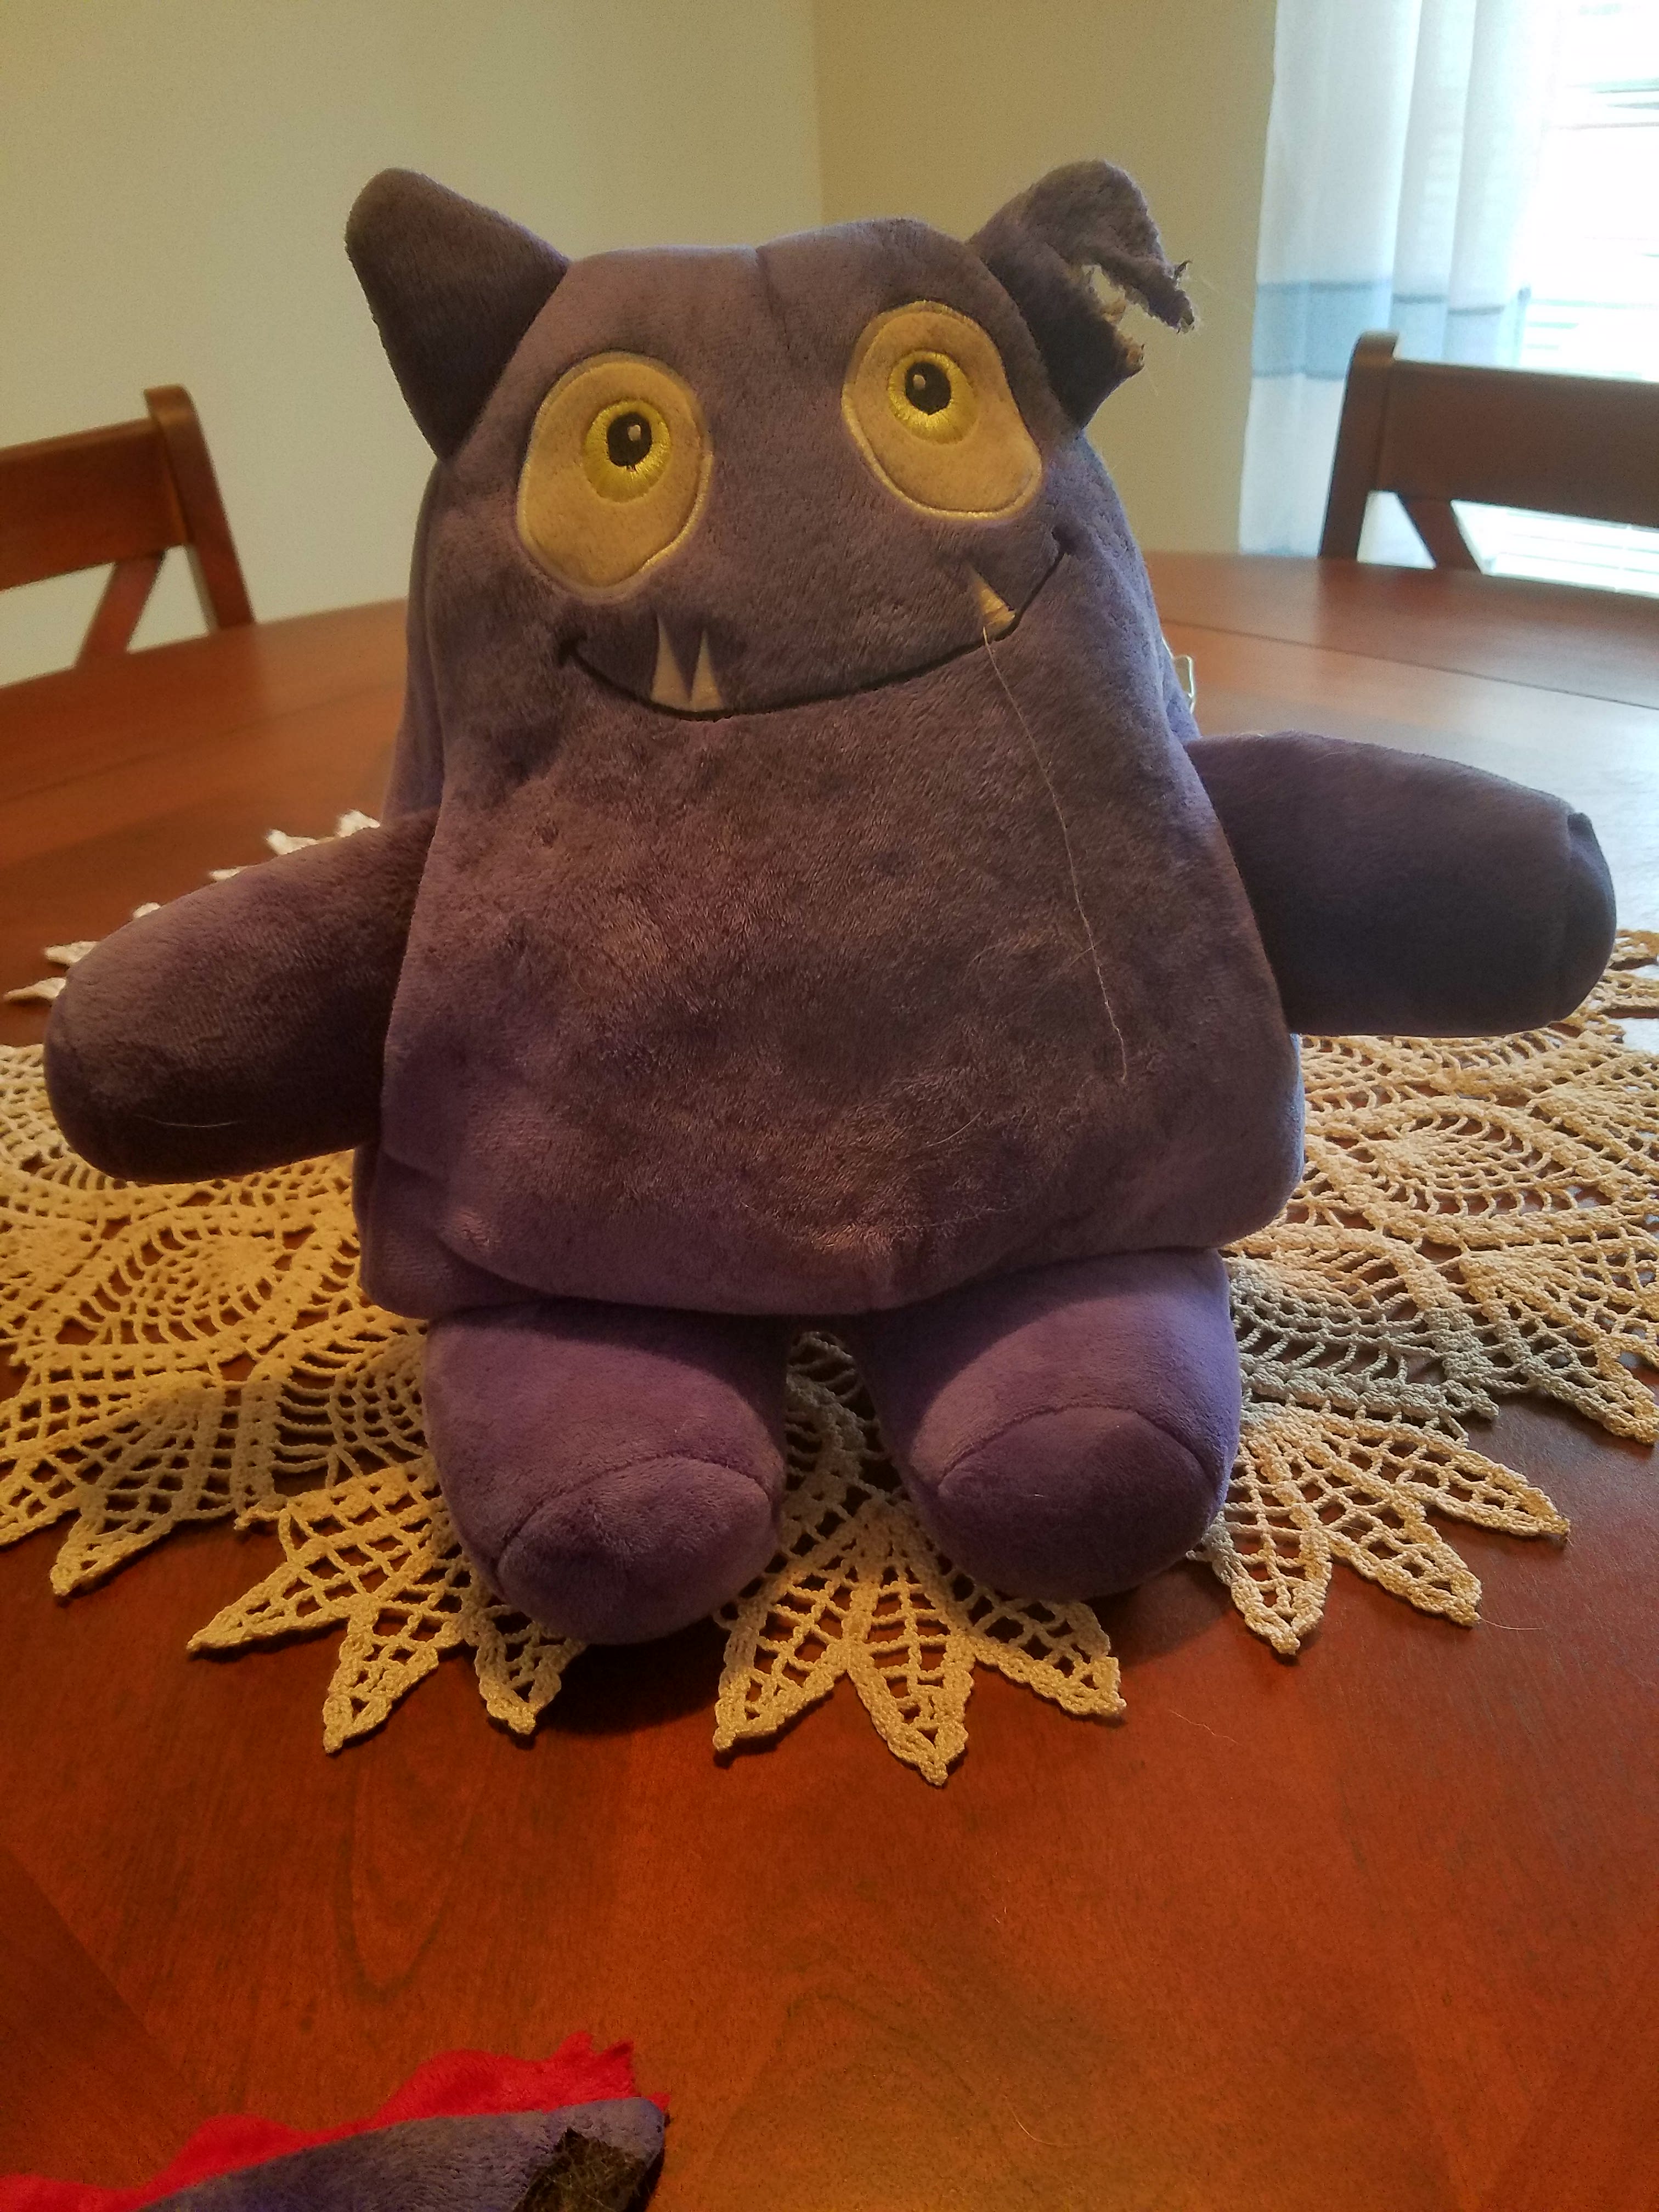 Tearribles Tough Reattaching Dog Toy Initial Impressions 